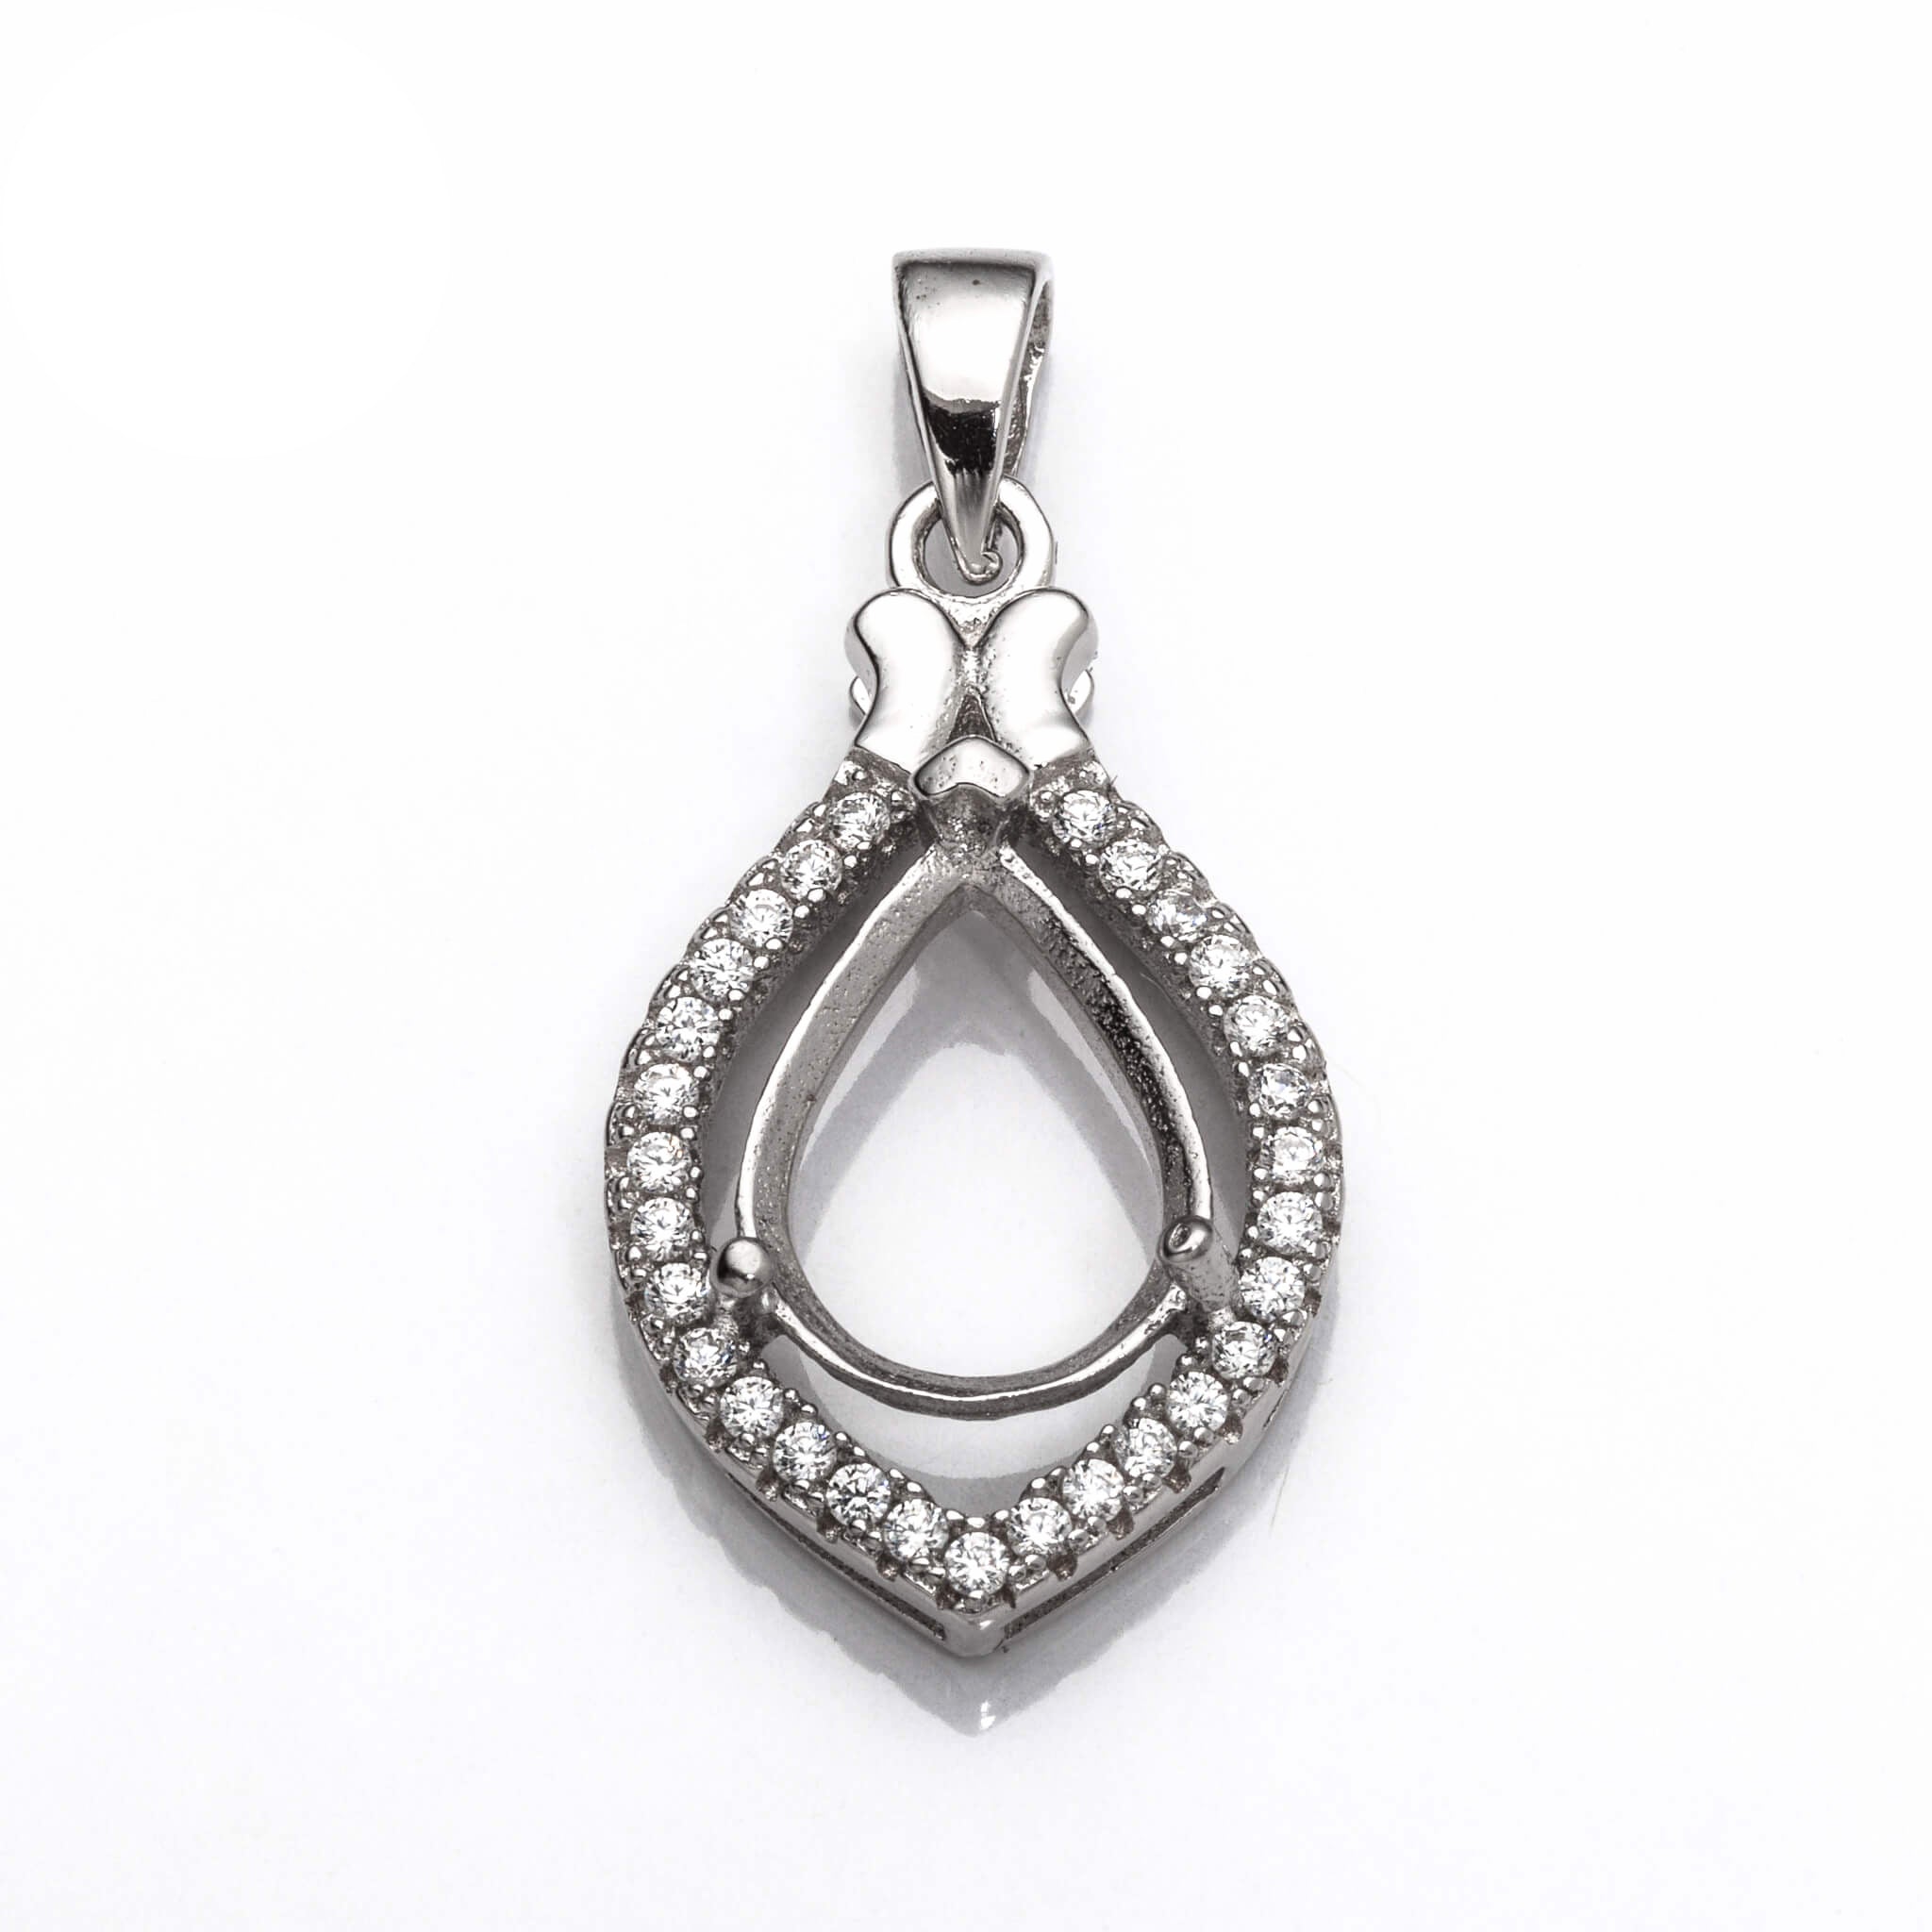 Pear Pendant Setting with CZ's and Pear Shape Prongs Mounting including Bail in Sterling Silver 8x10mm